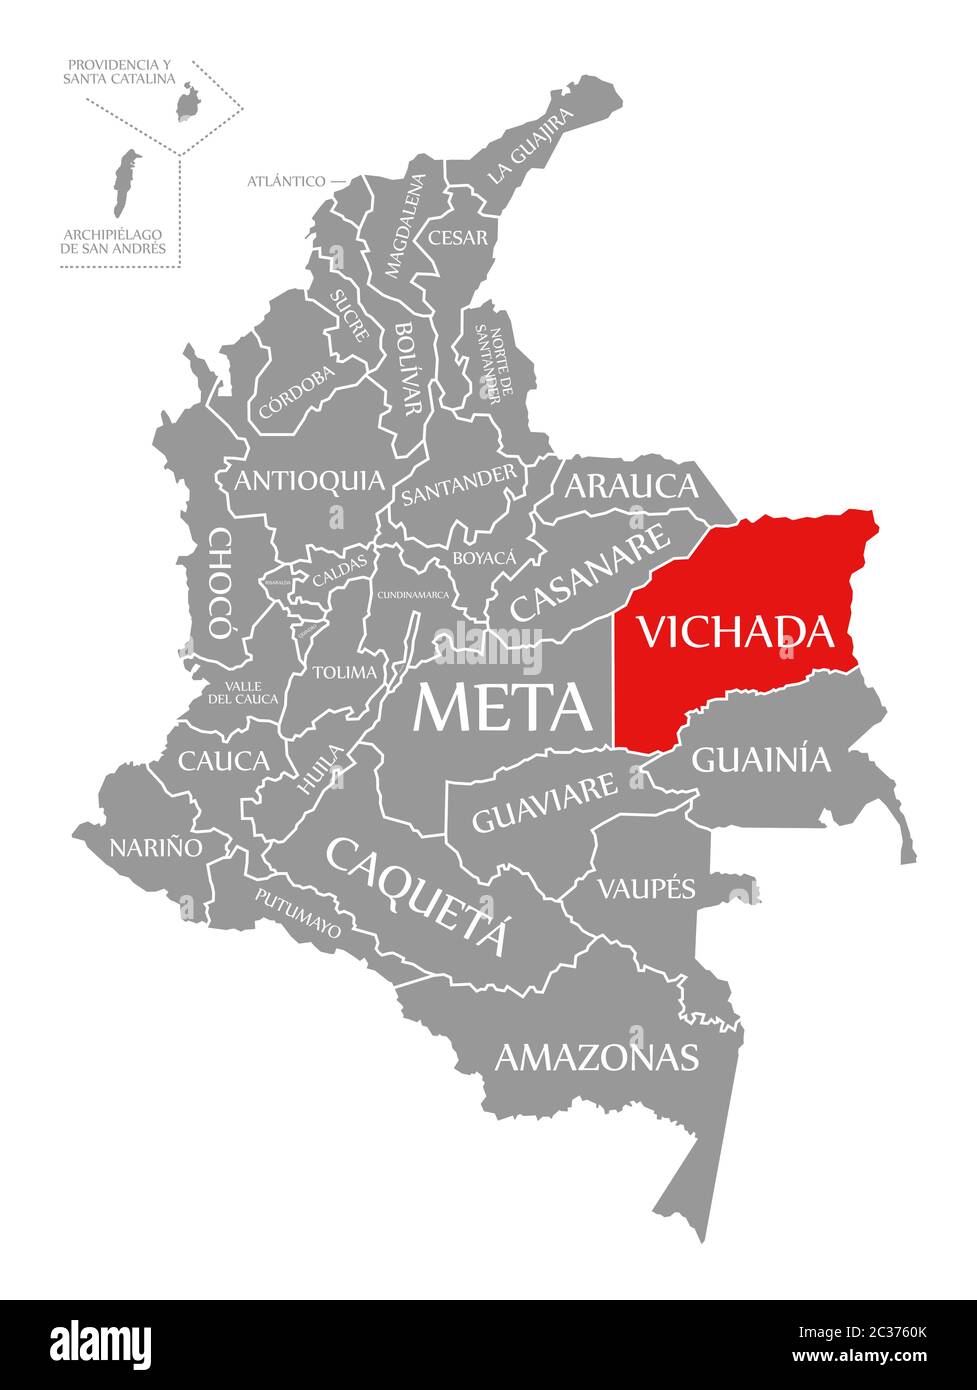 Vichada red highlighted in map of Colombia Stock Photo